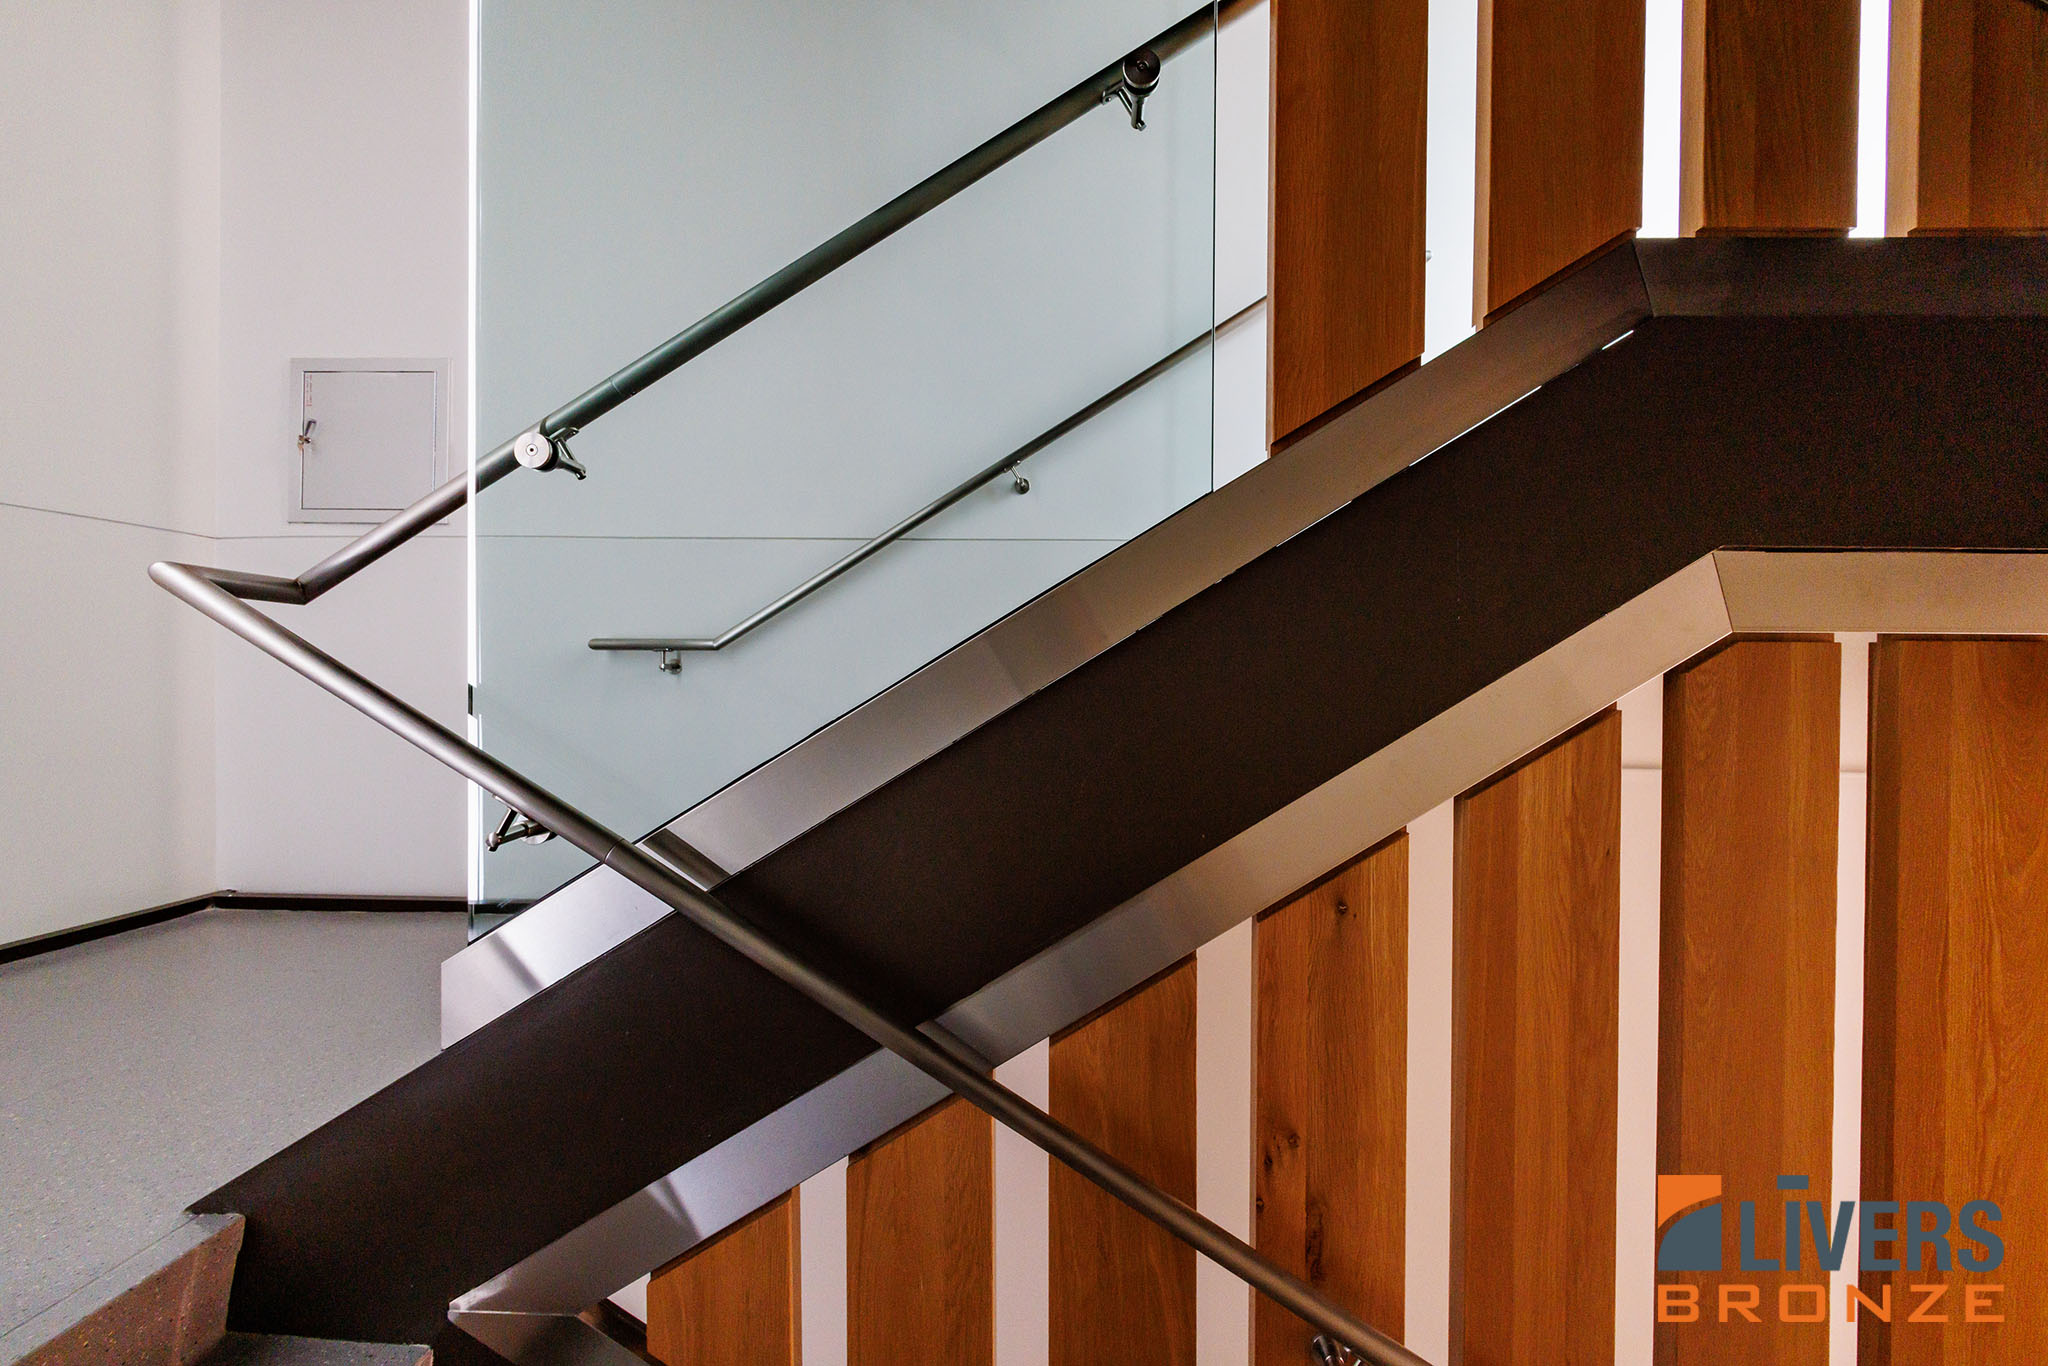 Livers Bronze Struct-U-Rail Commercial Glass Railing System with laminated glass was installed in the interior stairway at Lehigh University's Health, Science & Technology Building and is Made in the USA.